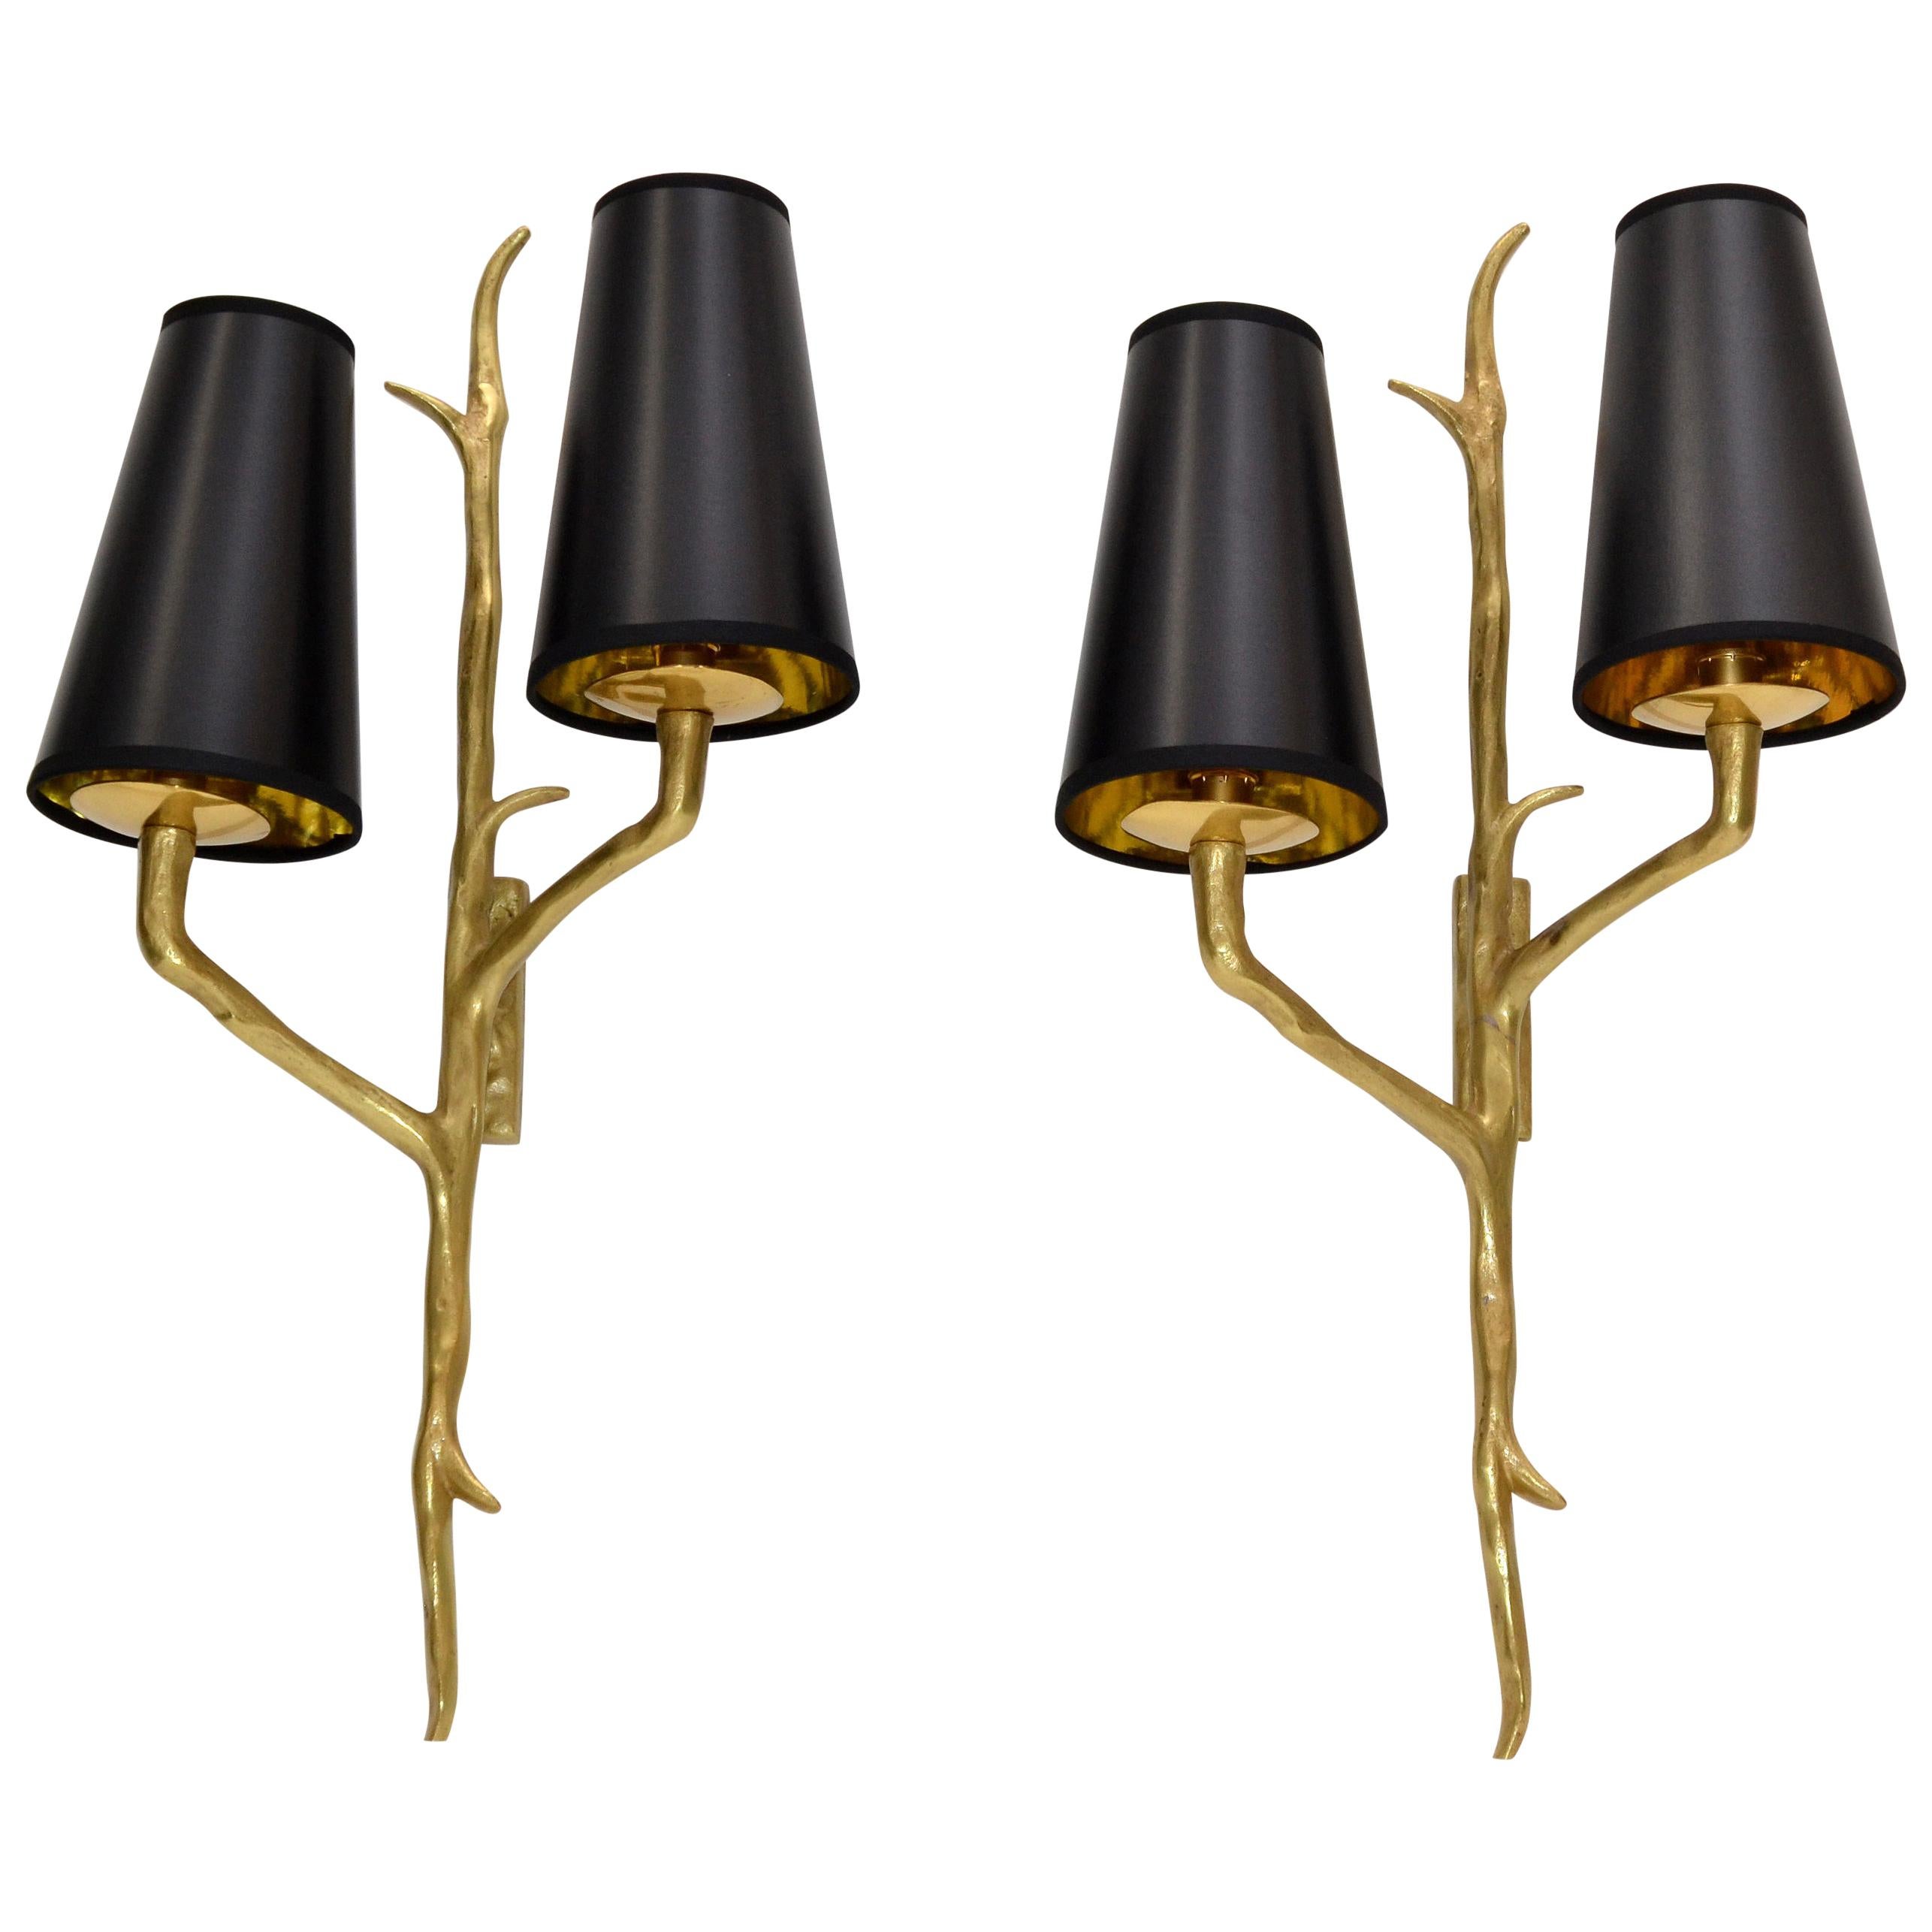 Pair of Agostini Style Sconces Bronze with Black and Gold Shades, France, 1950s